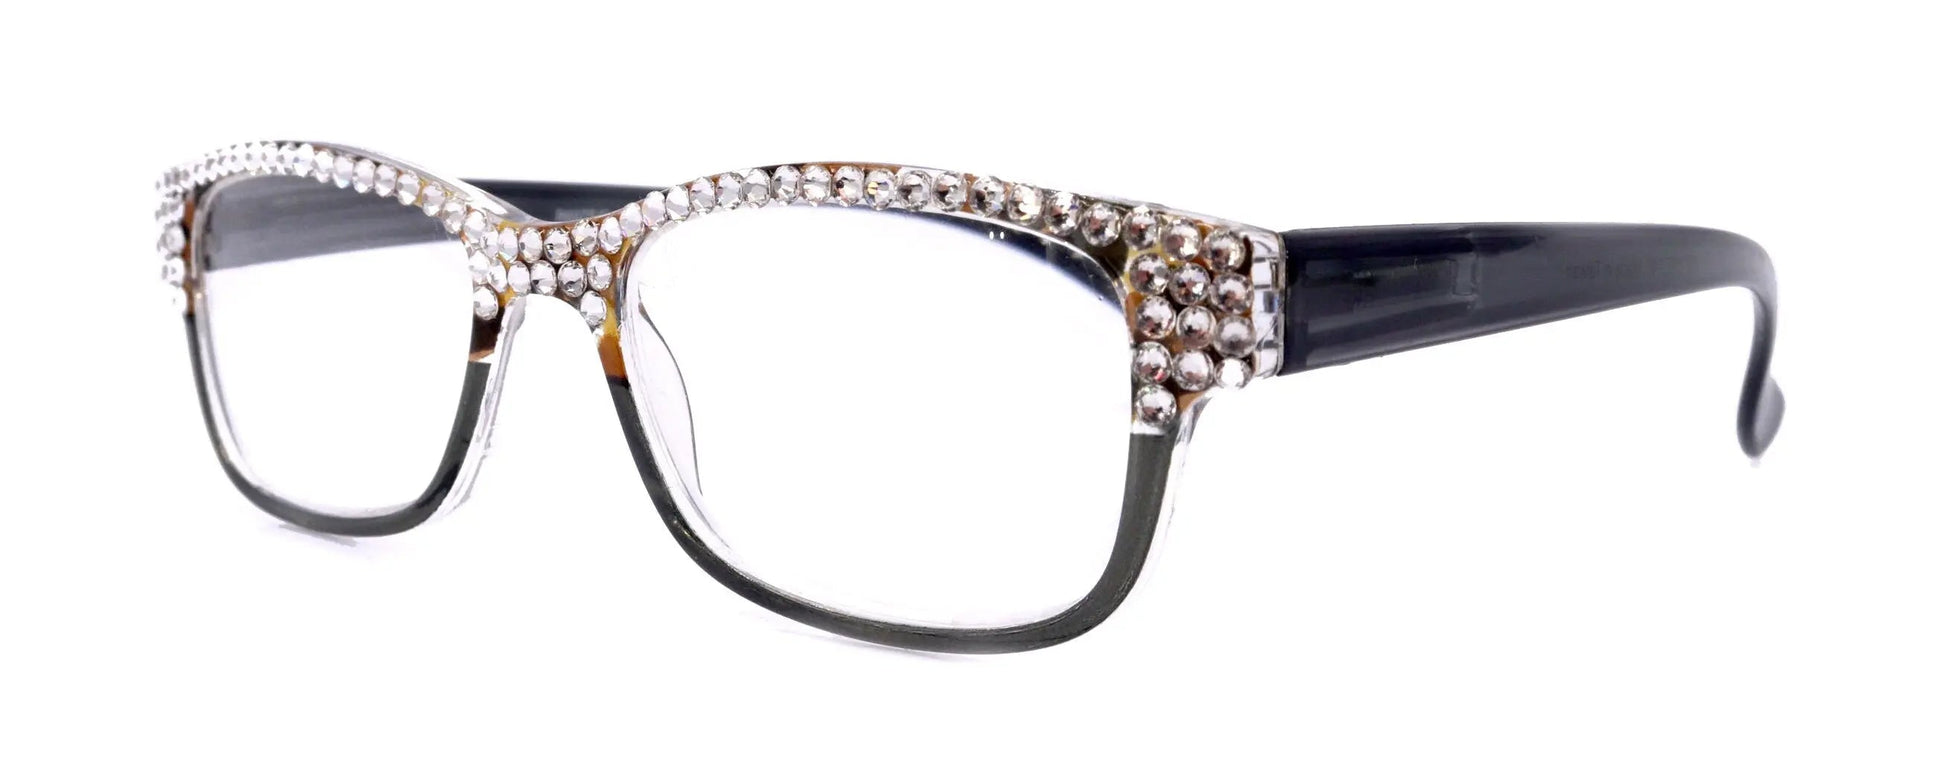 Olivia, (Bling) Women Reading Glasses Adorned with (Full Top) (Clear) Genuine European Crystals.  (Black, Grey) Square, NY fifth avenue. 